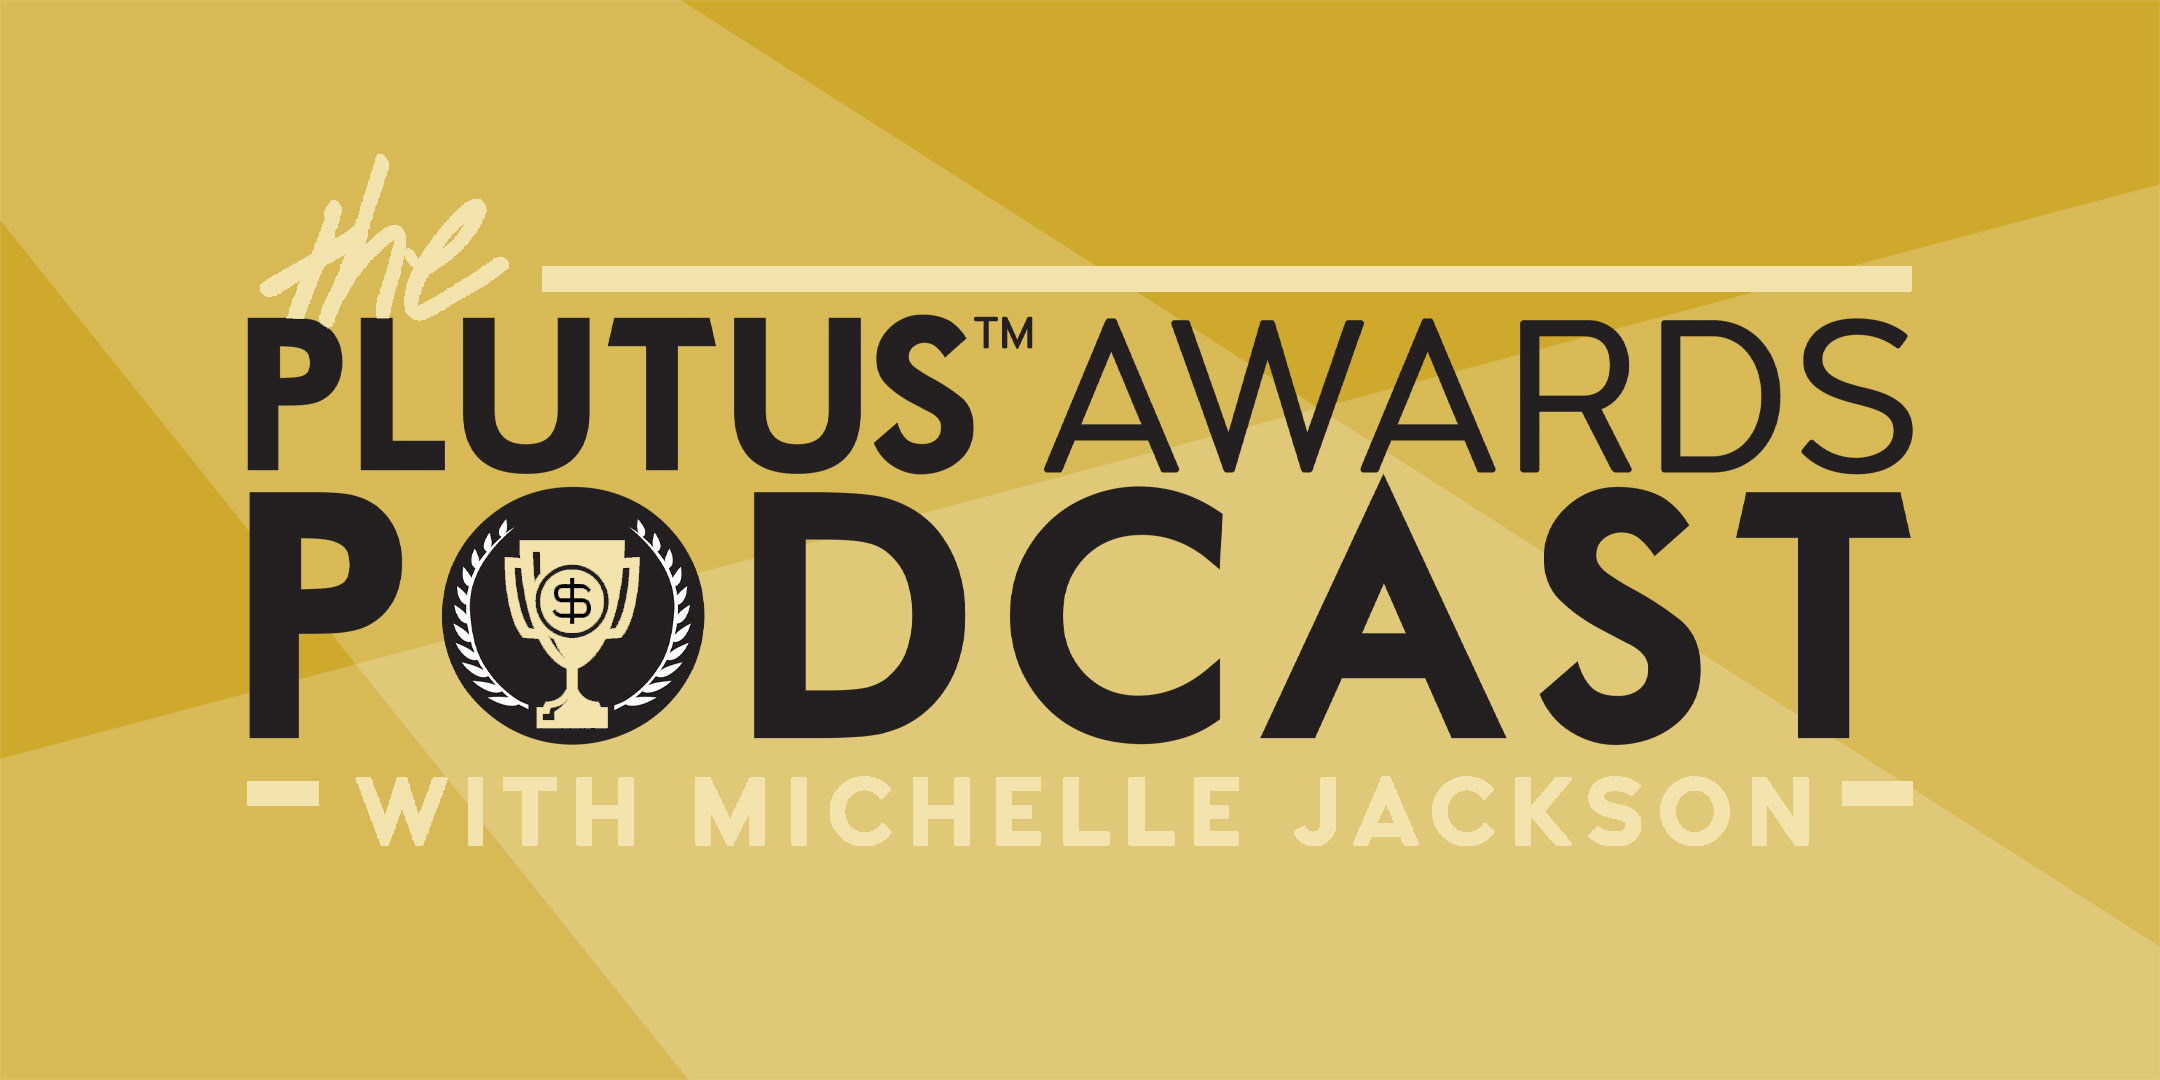 The Plutus Awards Podcast Returns With a New Host, Michelle Jackson